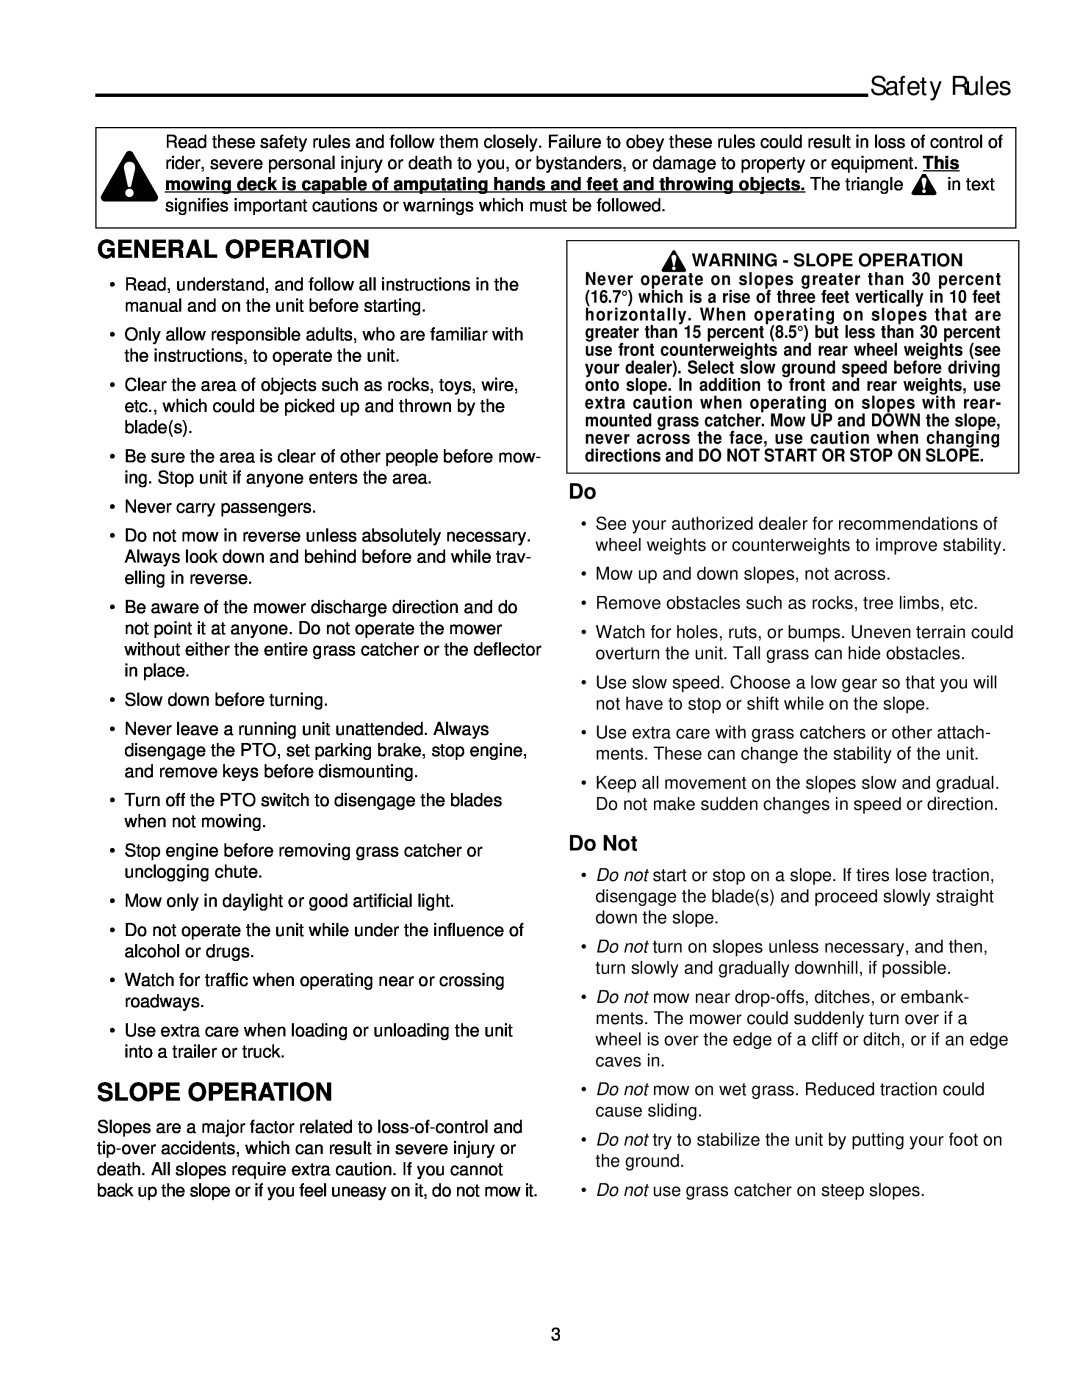 Simplicity 11HP, 14HP manual Safety Rules, General Operation, Slope Operation, Do Not 